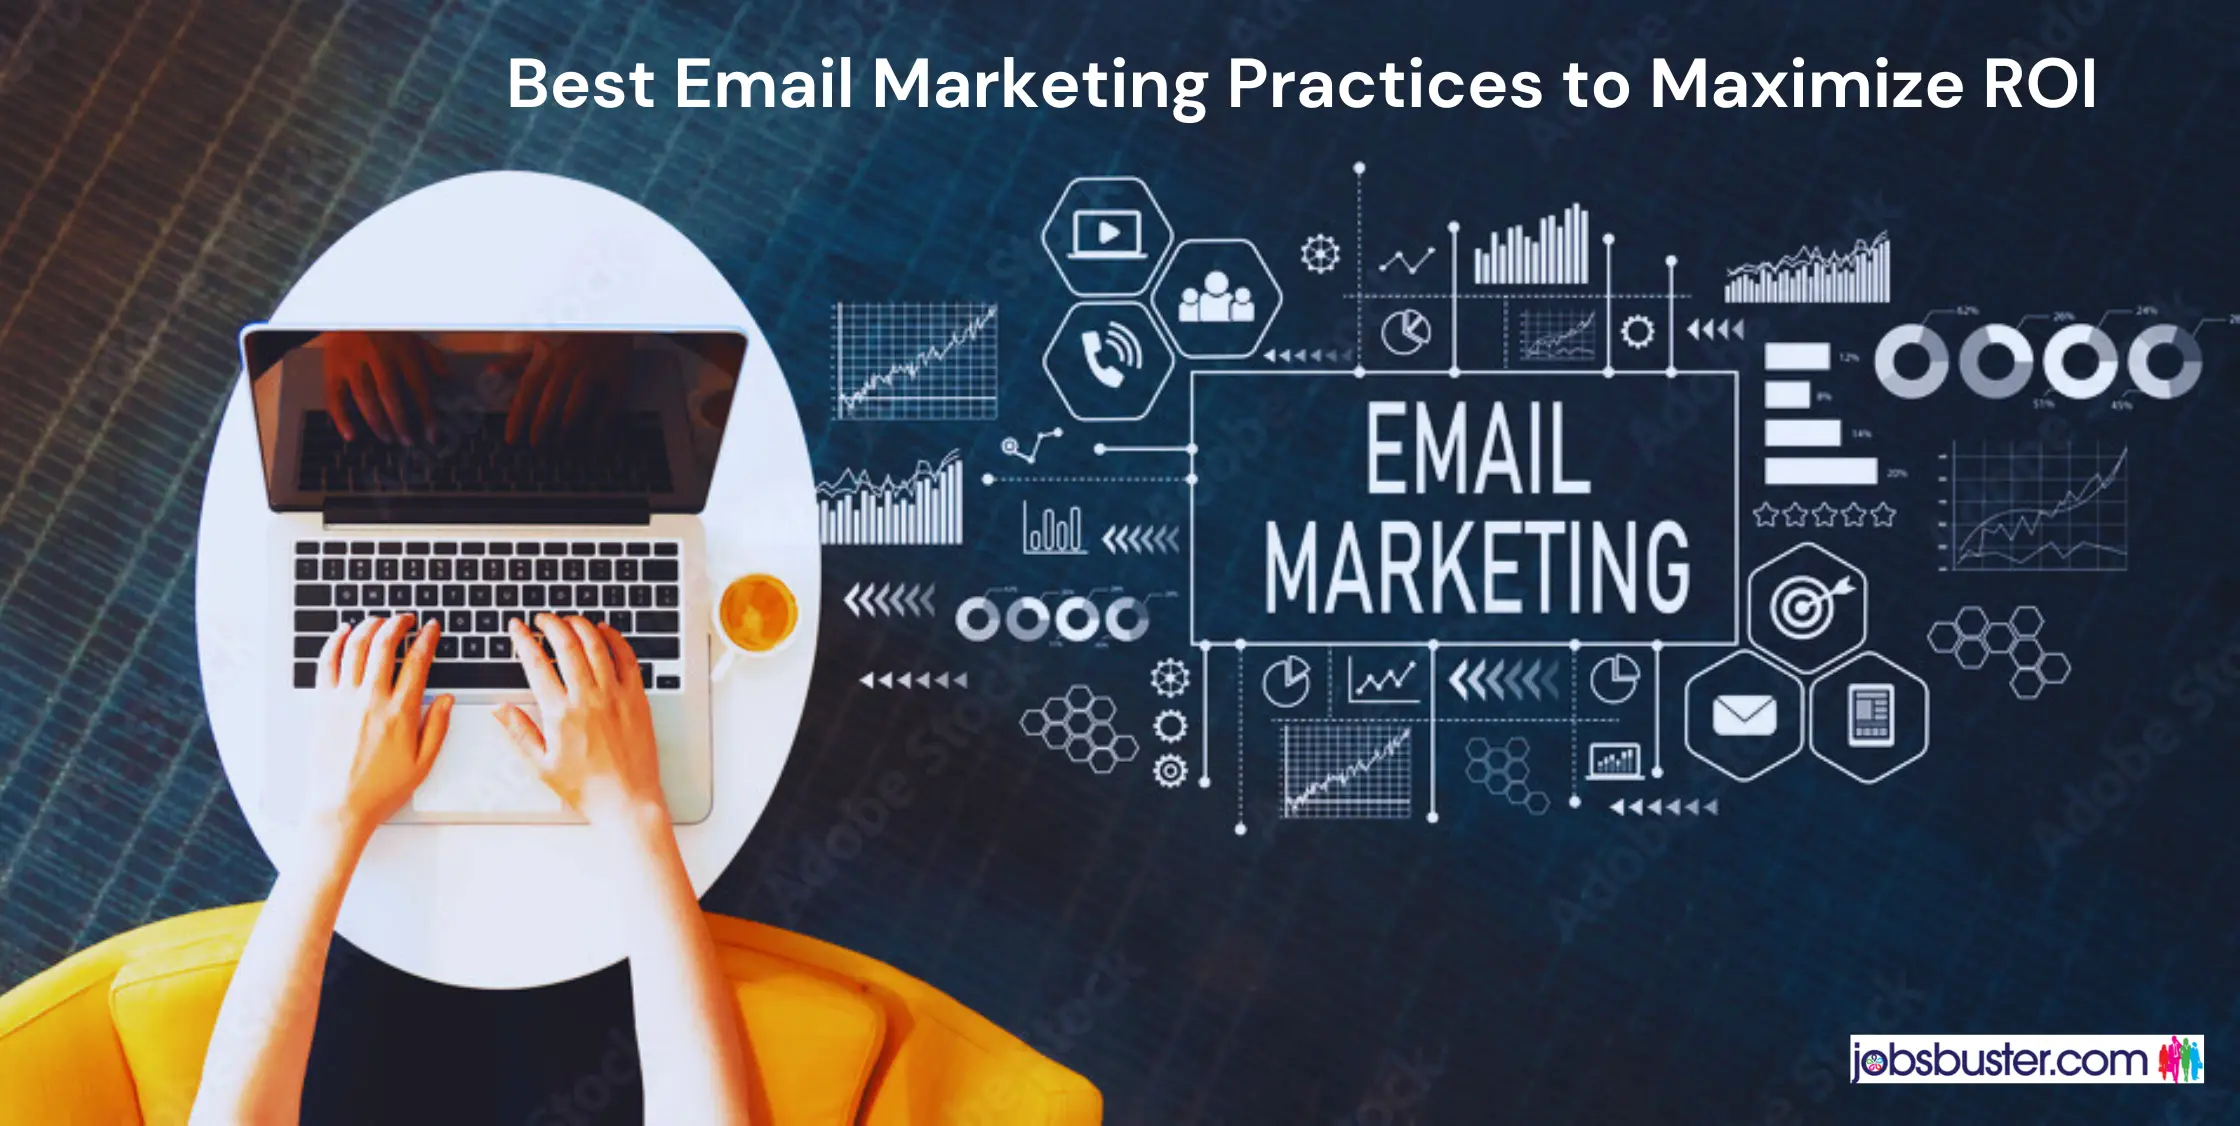 Best Email Marketing Practices to Maximize ROI